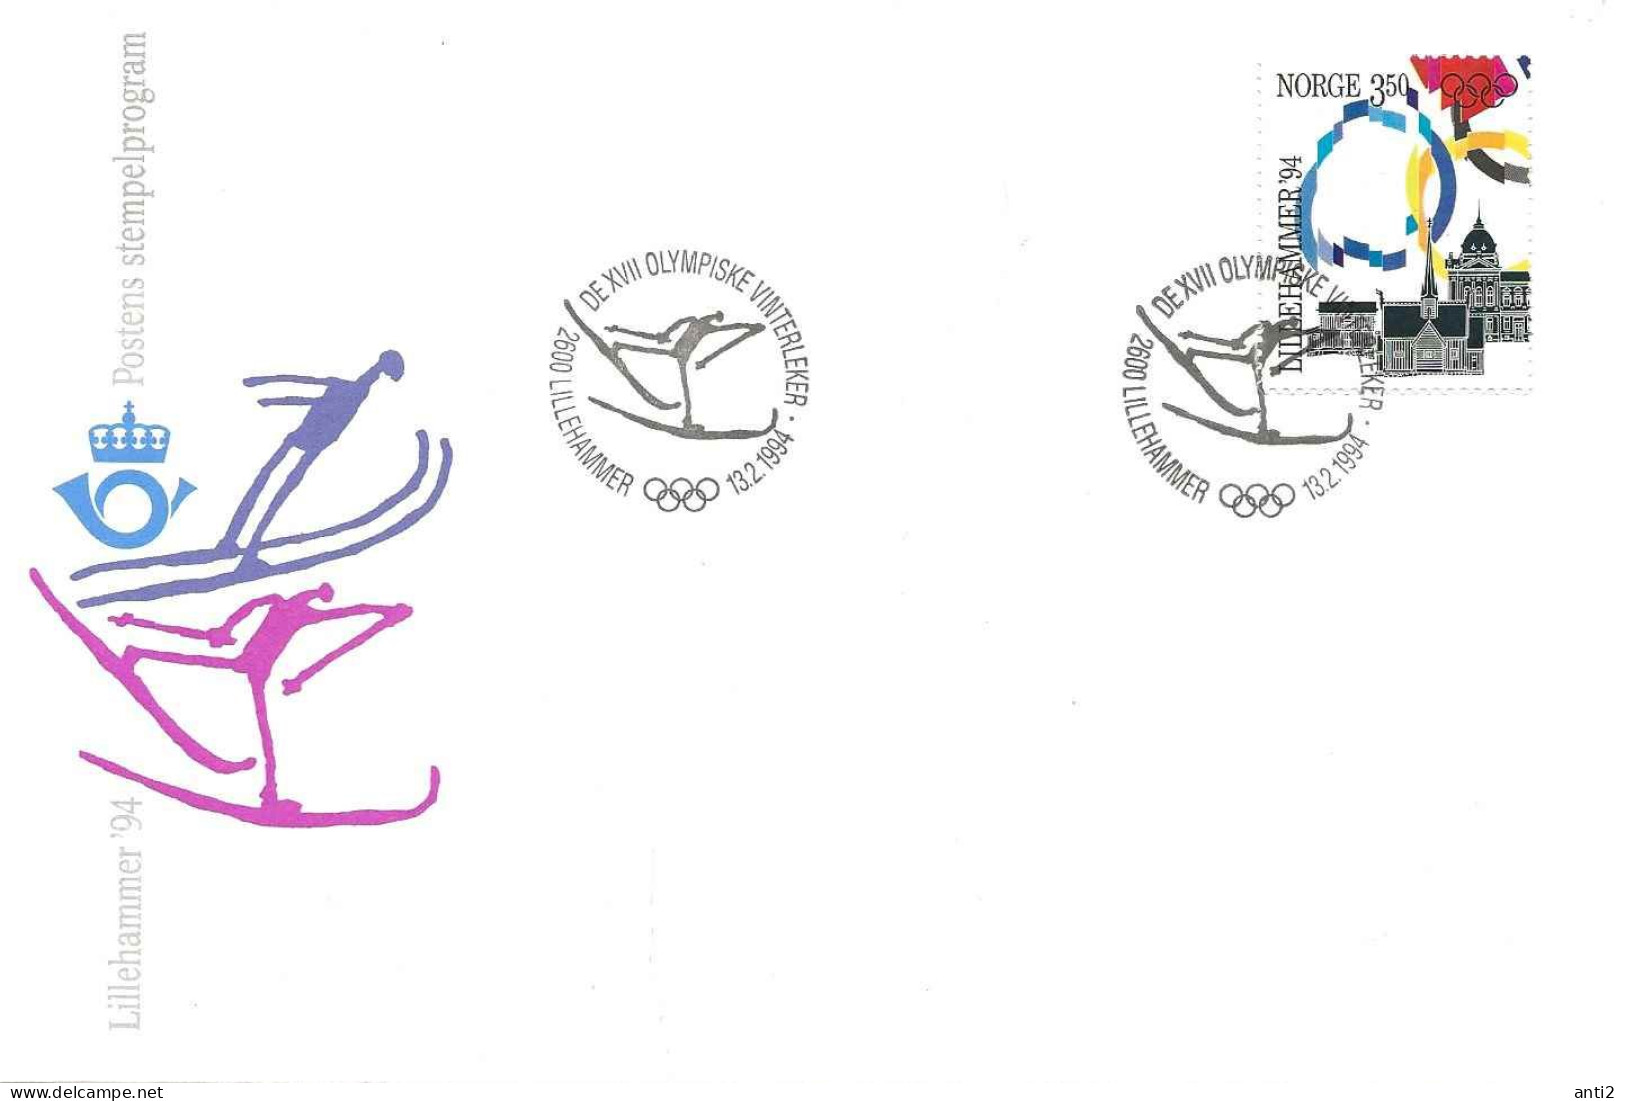 Norway Norge 1994 Winter Olympics, Lillehammer - Flags Mi 1148  Skiing Cross Country Cancelled Lillehammer 13.2.94 - Storia Postale